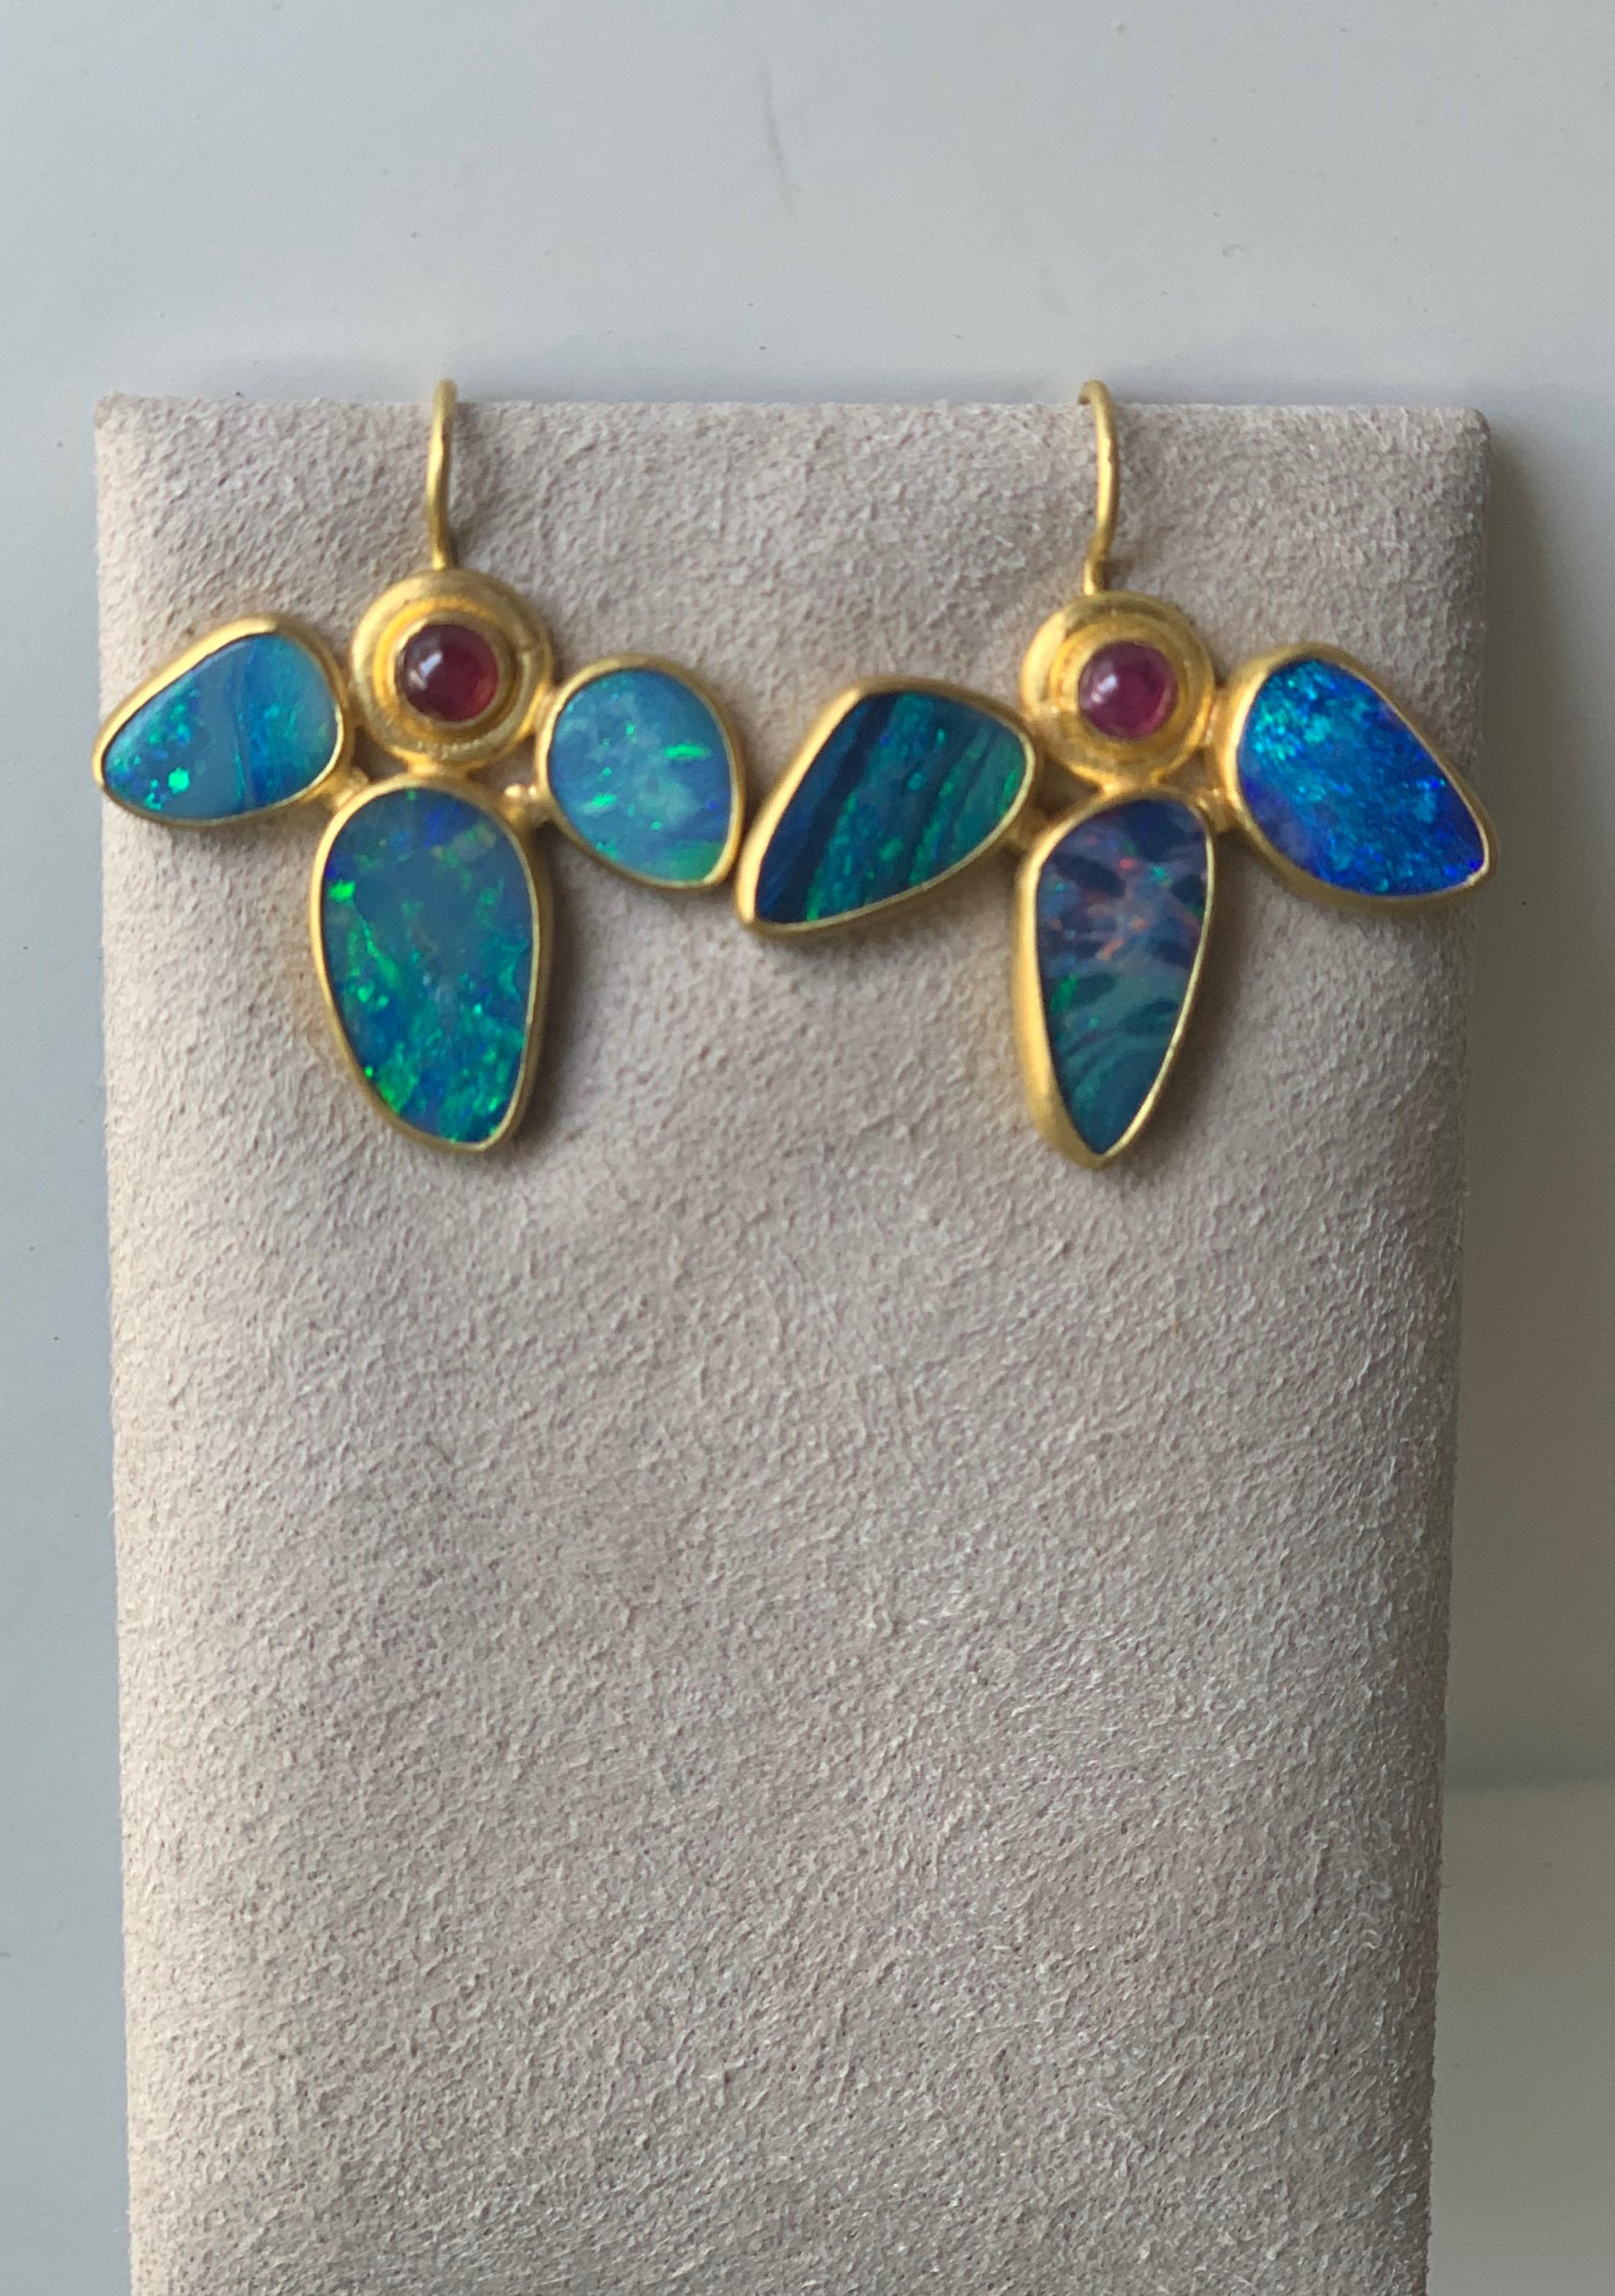 Lotus earrings of opal and ruby. Inspired  by a recent visit to the Bronx Botanical Gardens and by ancient Egyptian jewelry, these earrings are truly stunning and unique.
Comprised of 24cts of opals and 1.10 cts ruby cabochons they are entirely hand